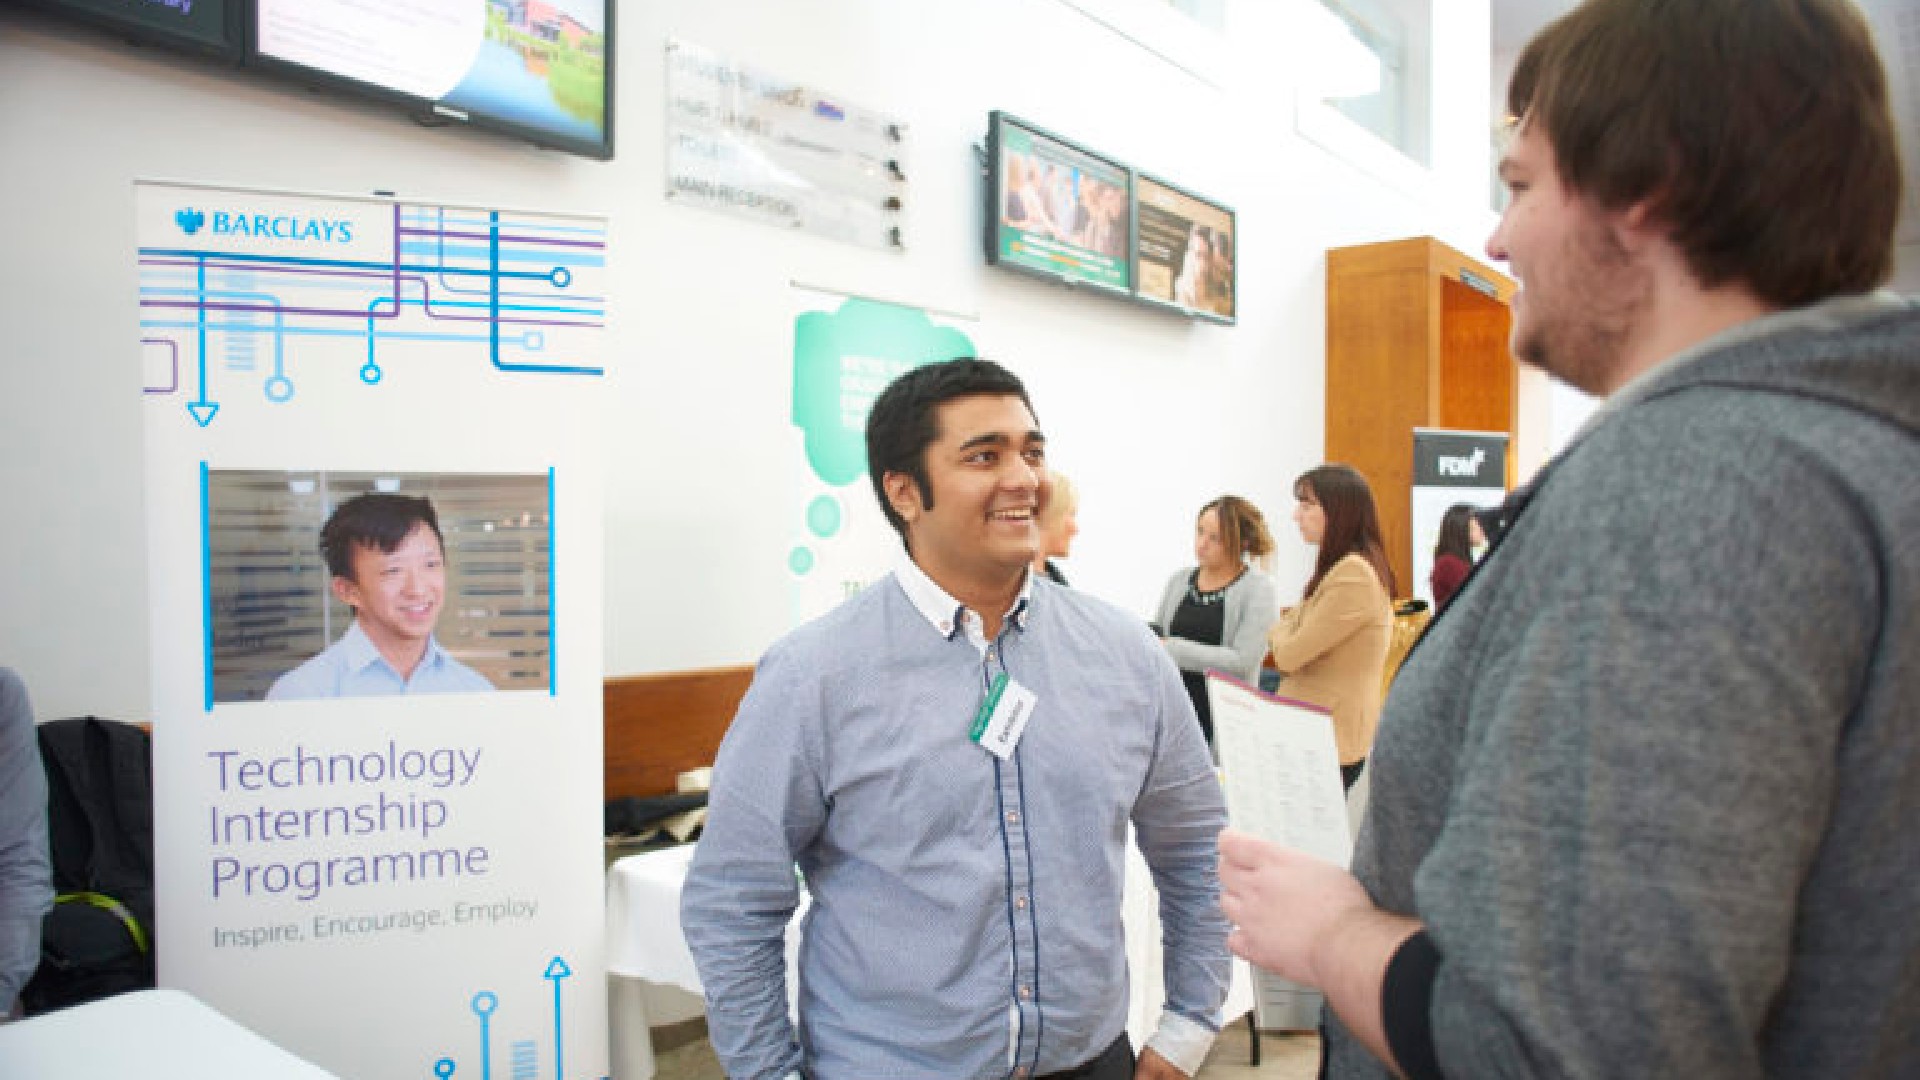 A student is talking to an employer in front of a sign that says "Barclays, Technology Internship Programme"